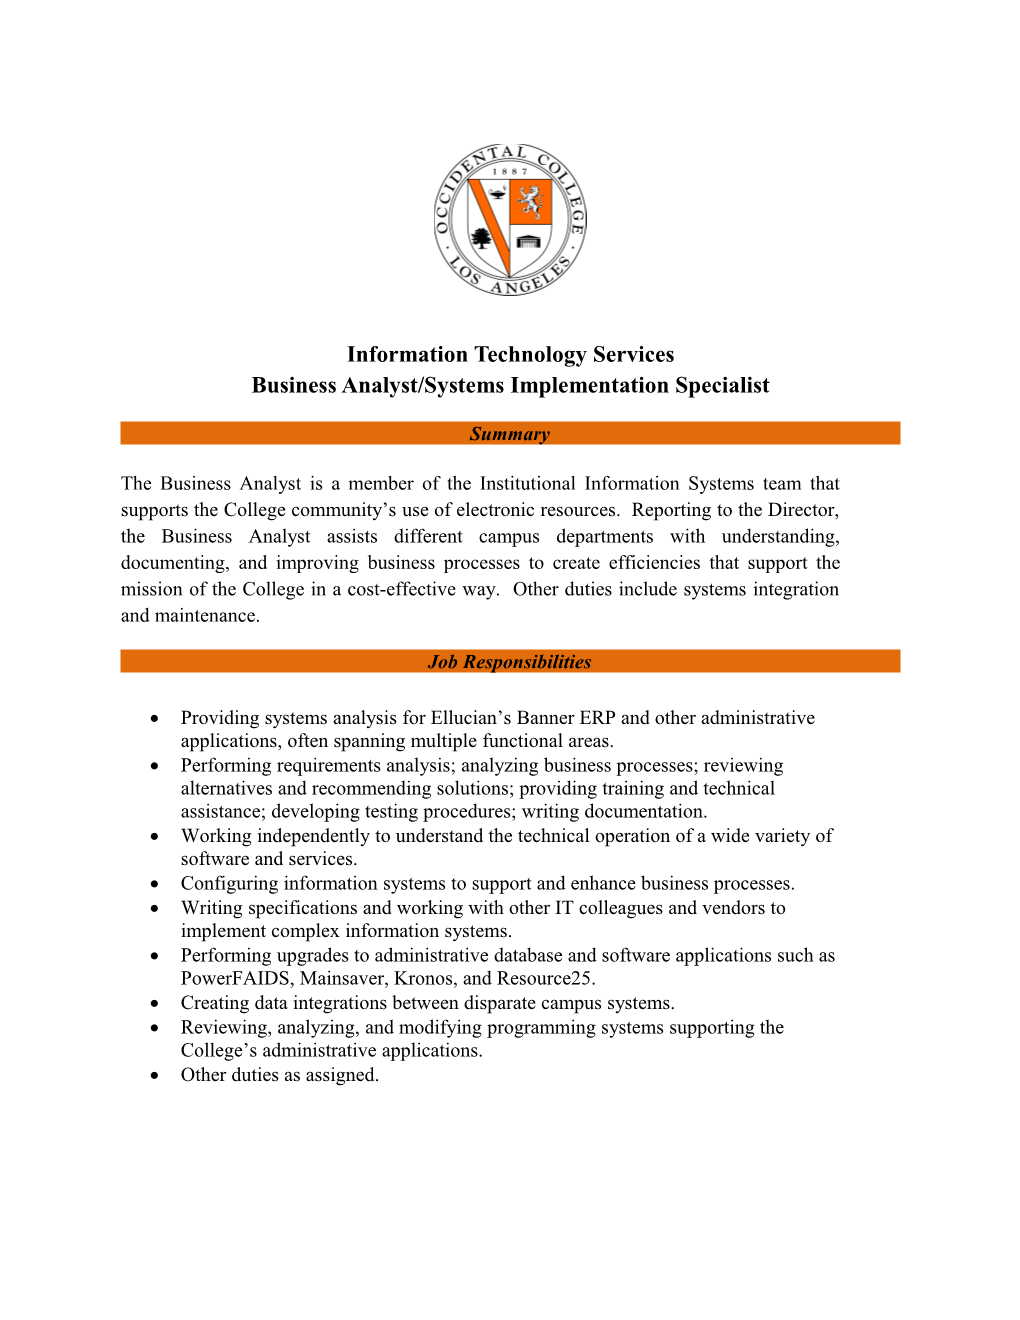 Information Technology Services Business Analyst/Systems Implementation Specialist